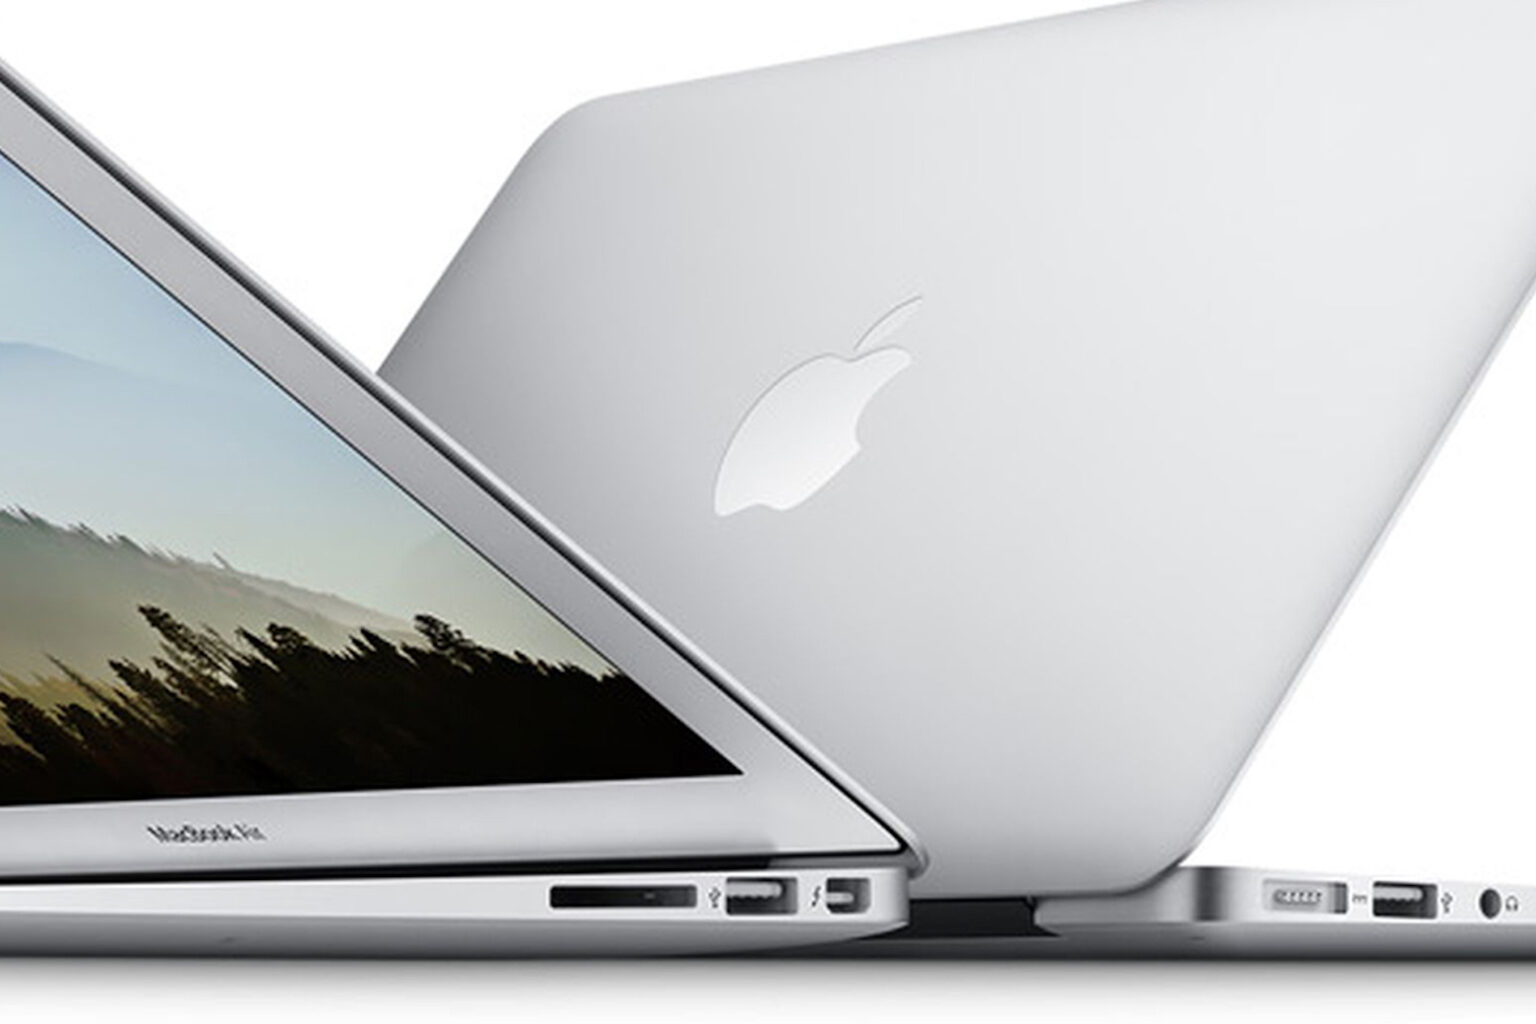 Here's your chance to grab refurb MacBooks on the cheap